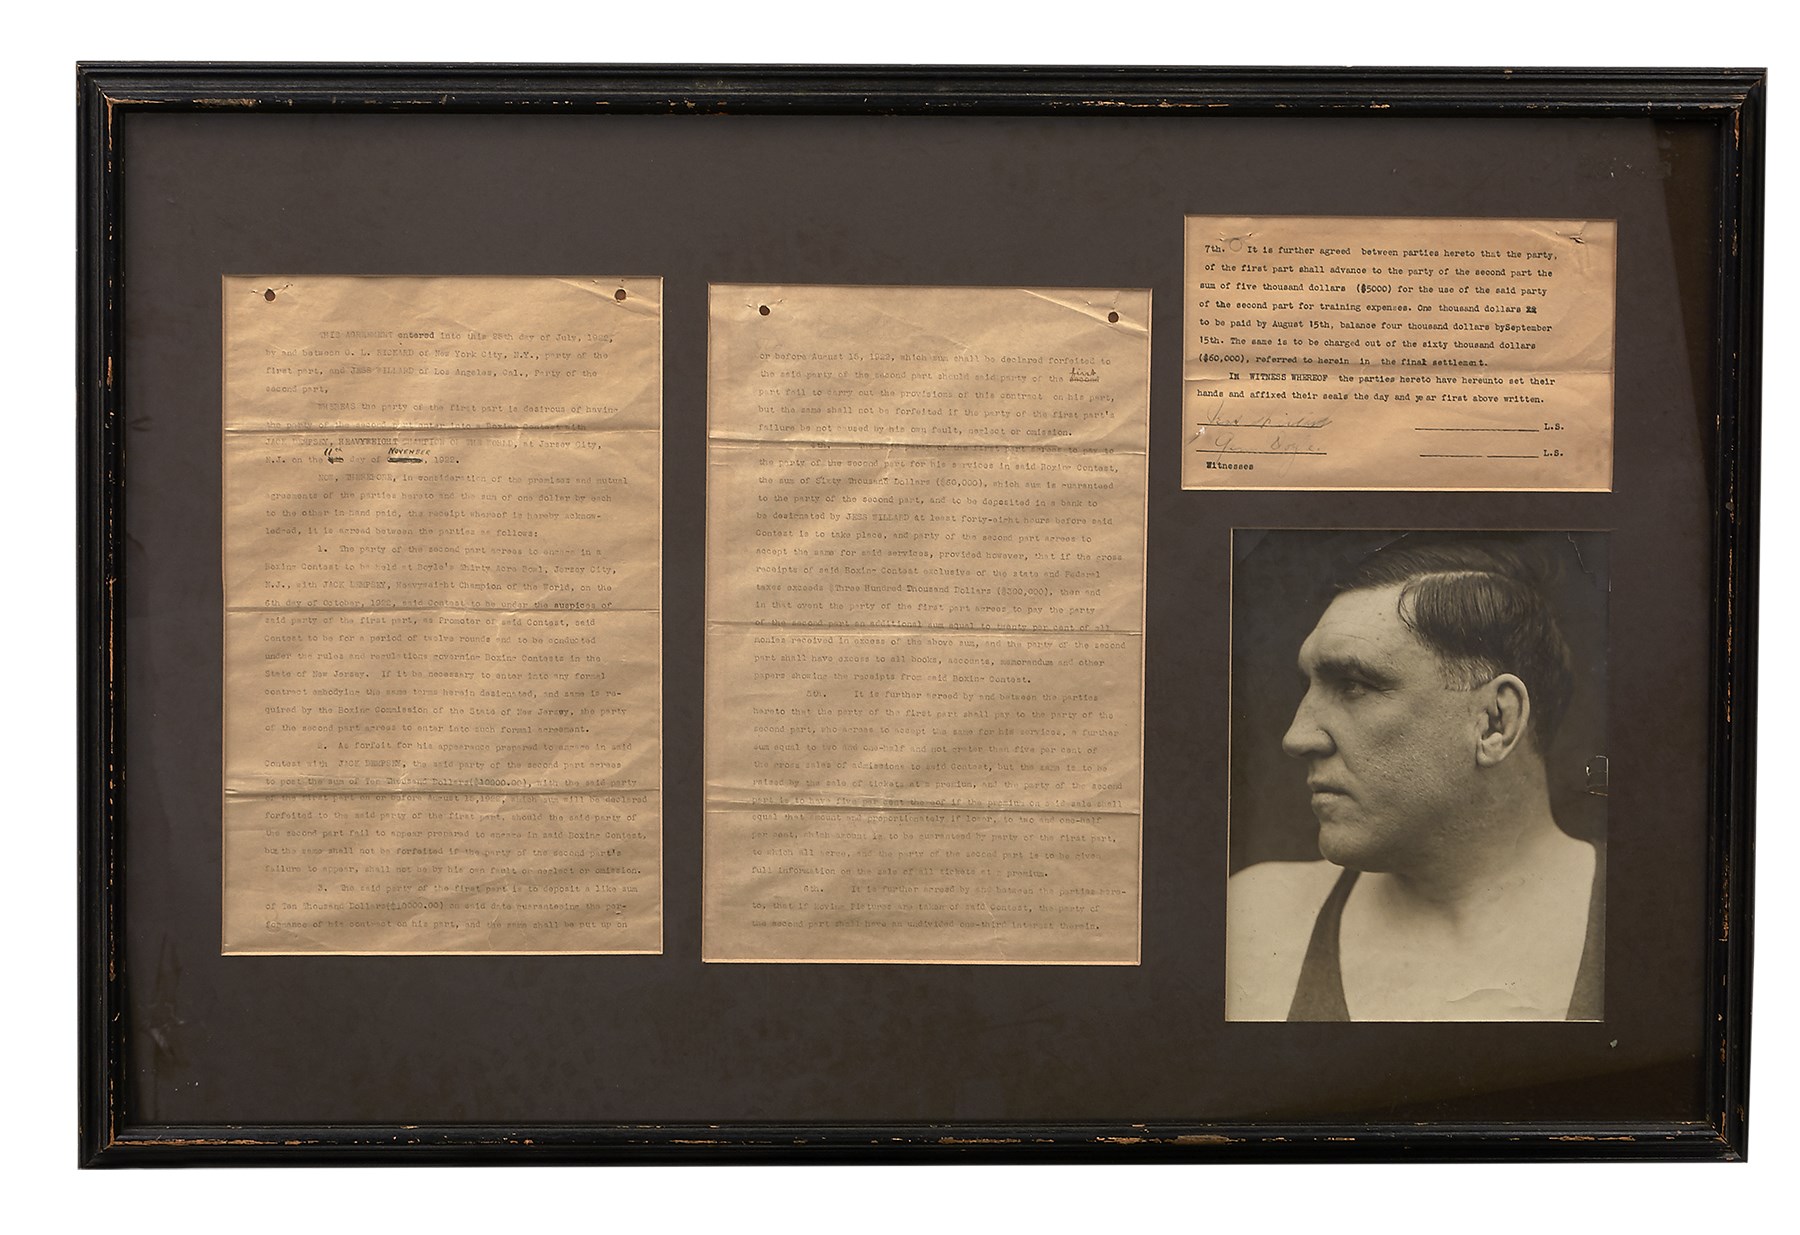 Muhammad Ali & Boxing - 1922 Jess Willard v. Jack Dempsey Fight Contract - The Rematch That Never Was (PSA)